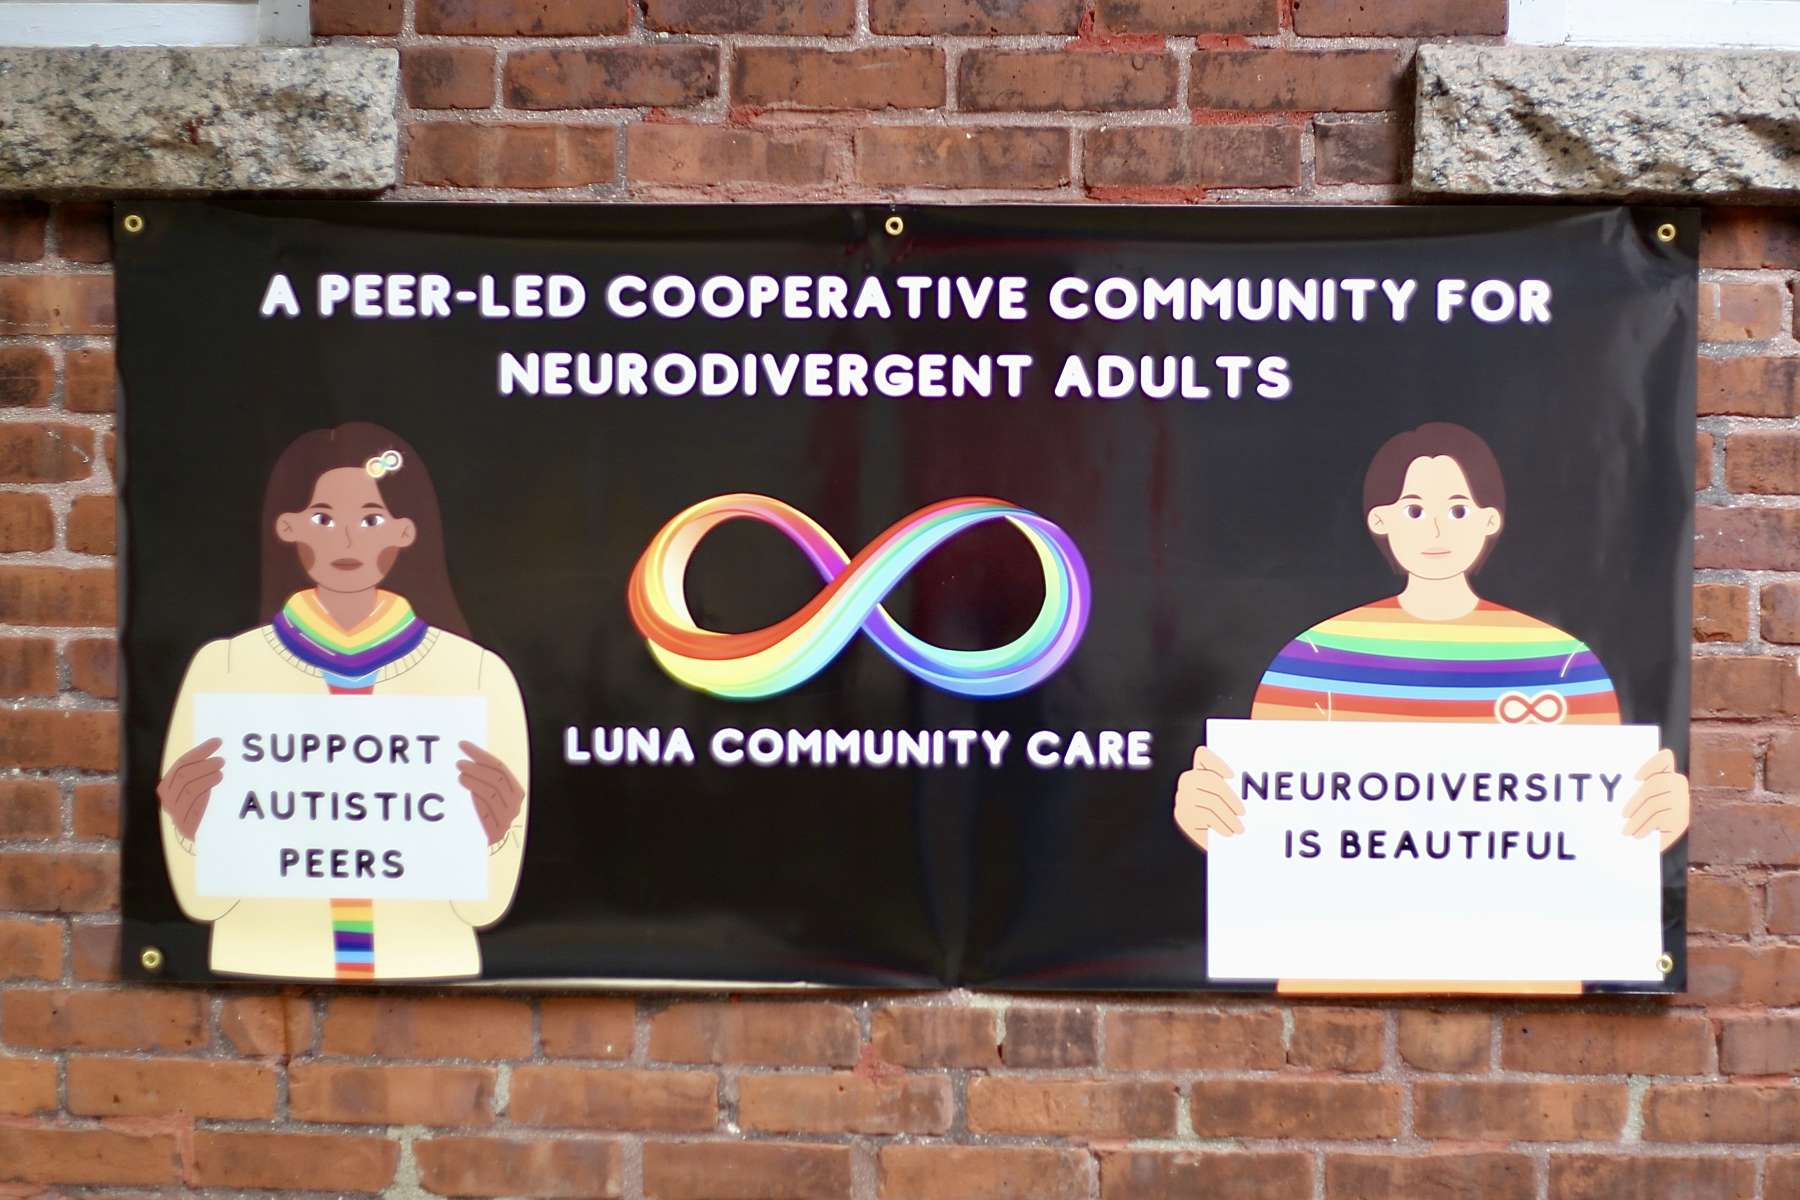 LUNA Community Care to provide services to neurodivergent and disabled adults